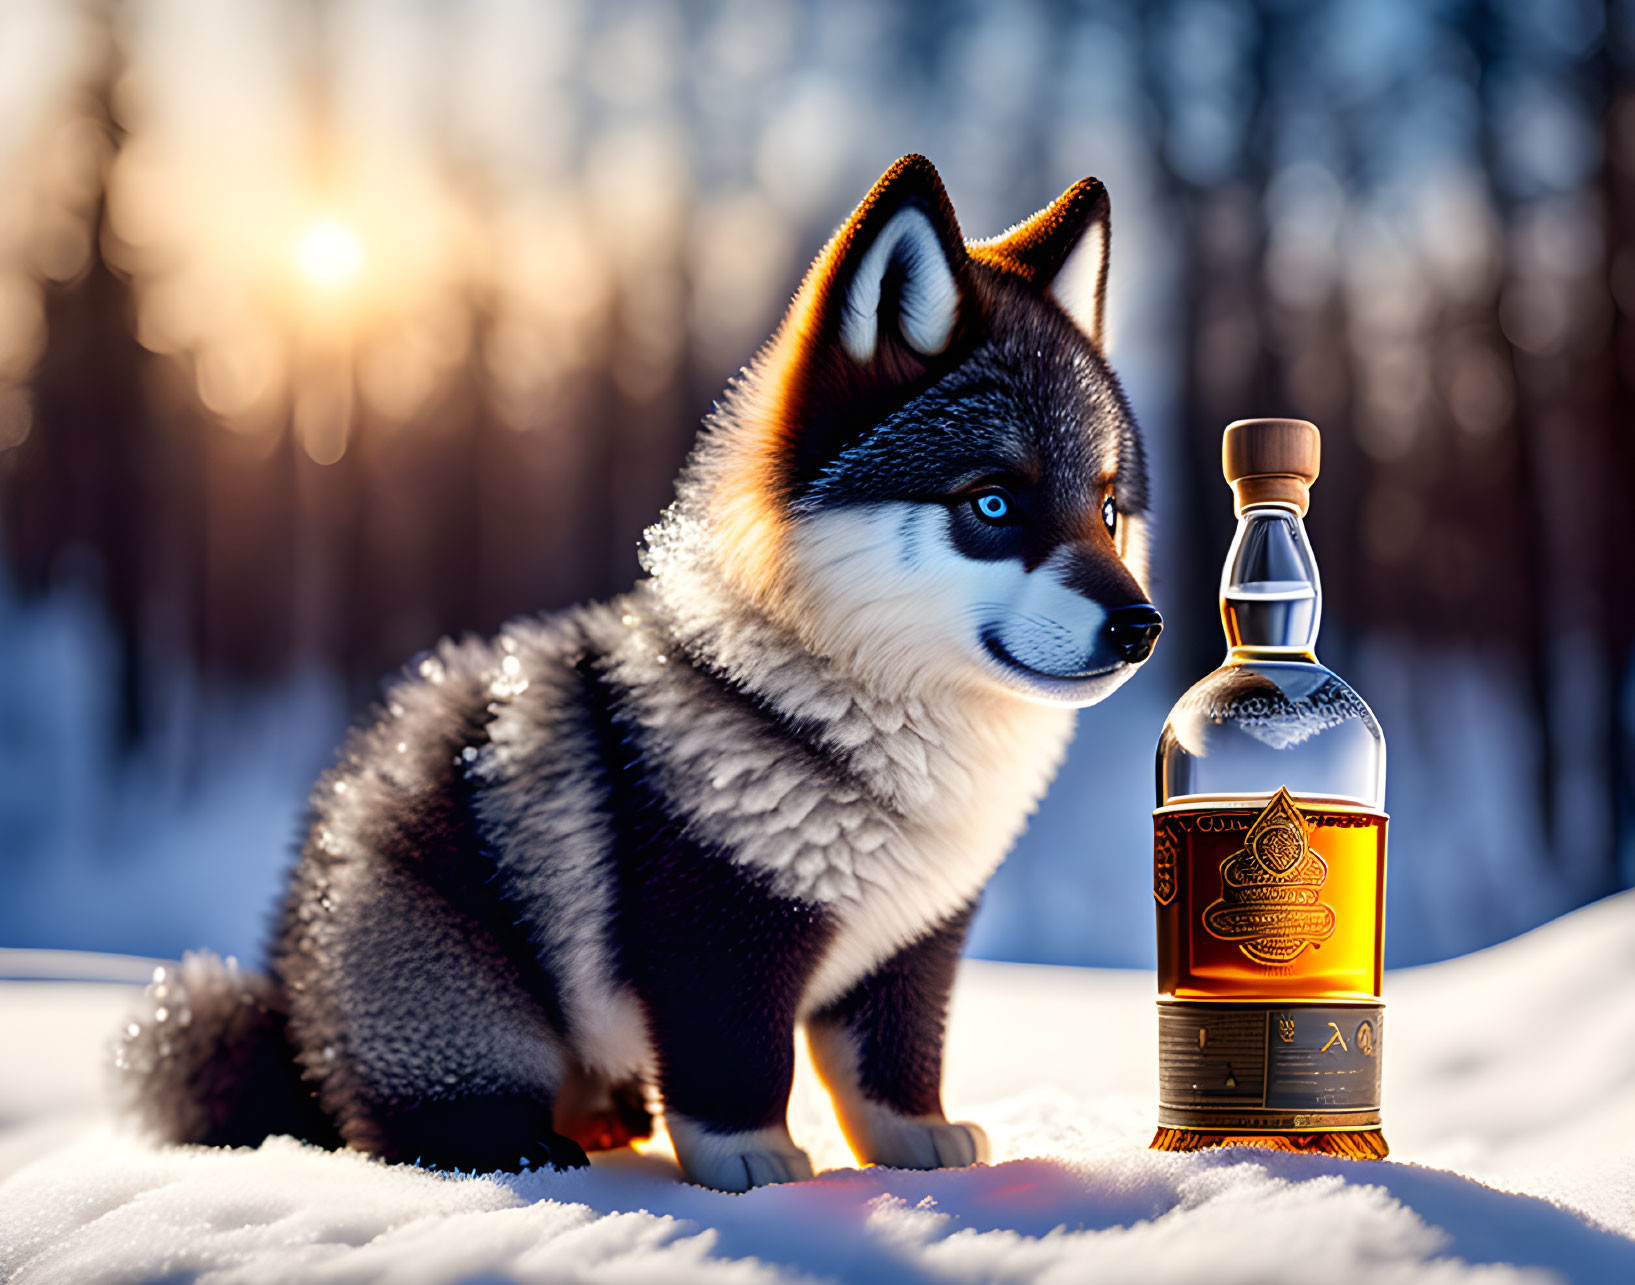 Plush Husky Puppy Toy with Bottle in Snow at Sunset